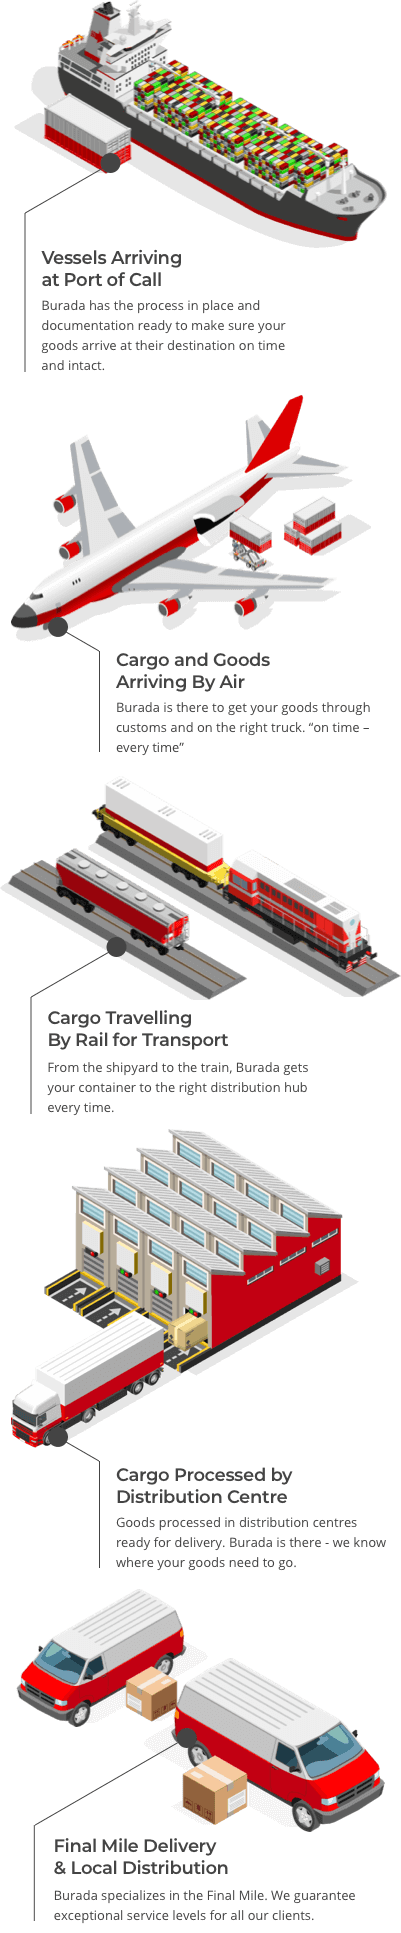 A visual breakdown of cargo and goods arriving at ports via various modes of transportation